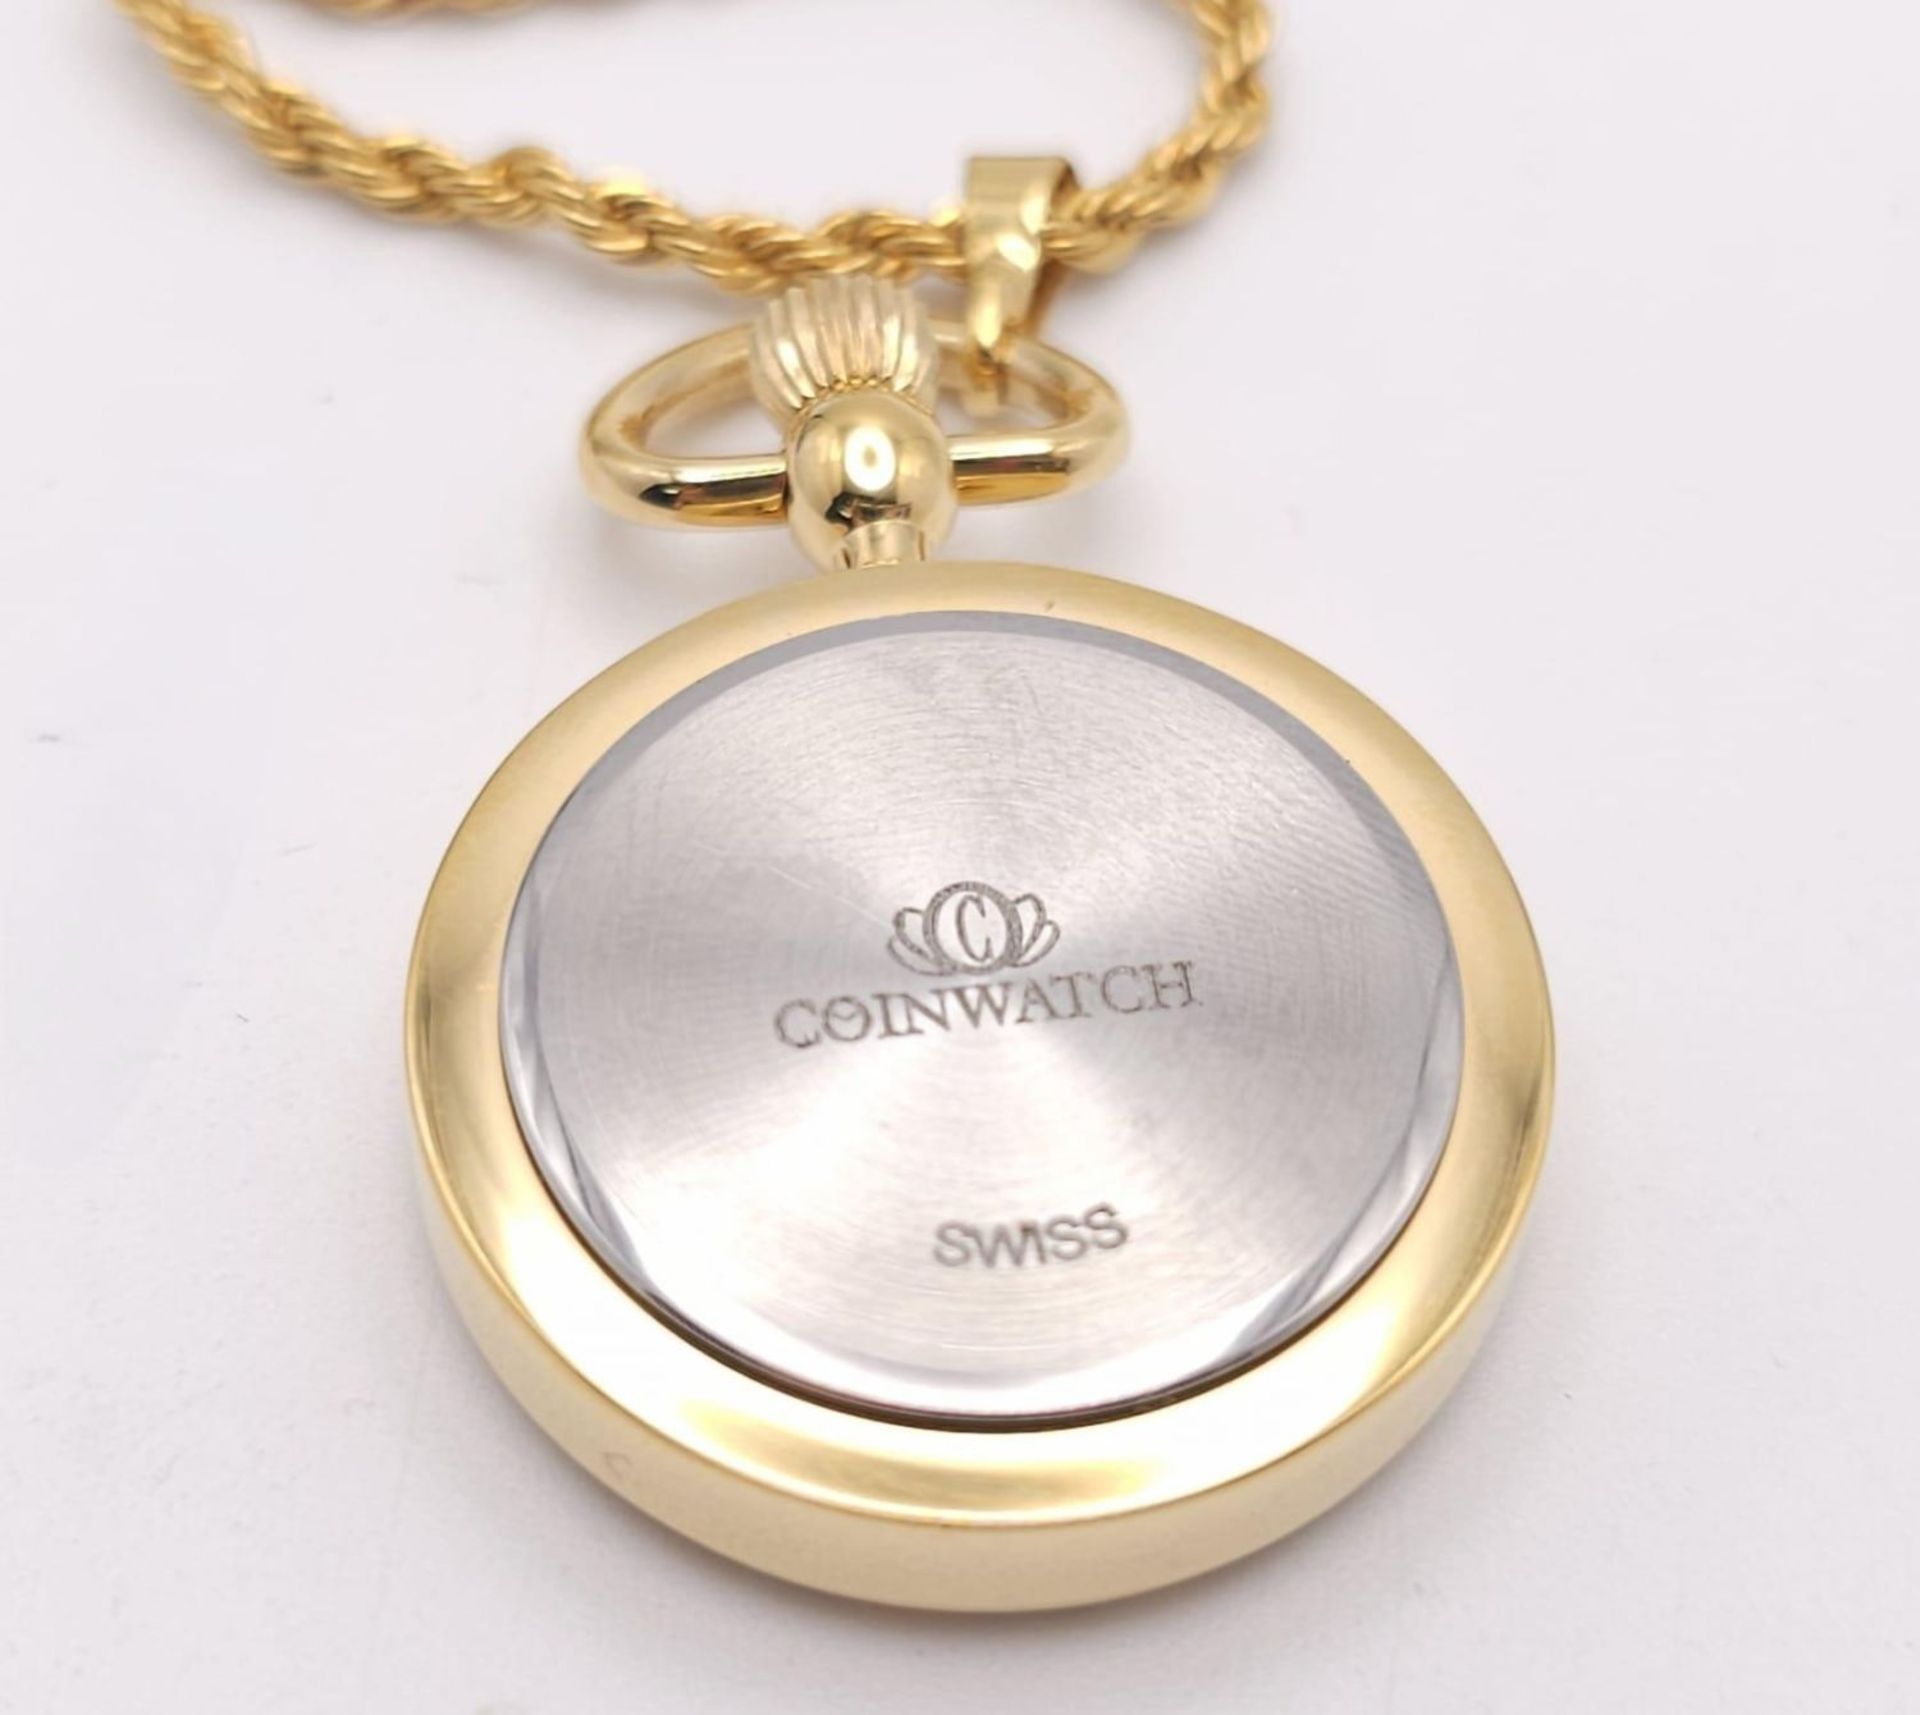 A BRAND NEW "COINWATCH" WITH 2 YEAR GUARANTEE . A PENDANT WATCH WITH A GENUINE COIN AS THE DIAL , - Bild 11 aus 18